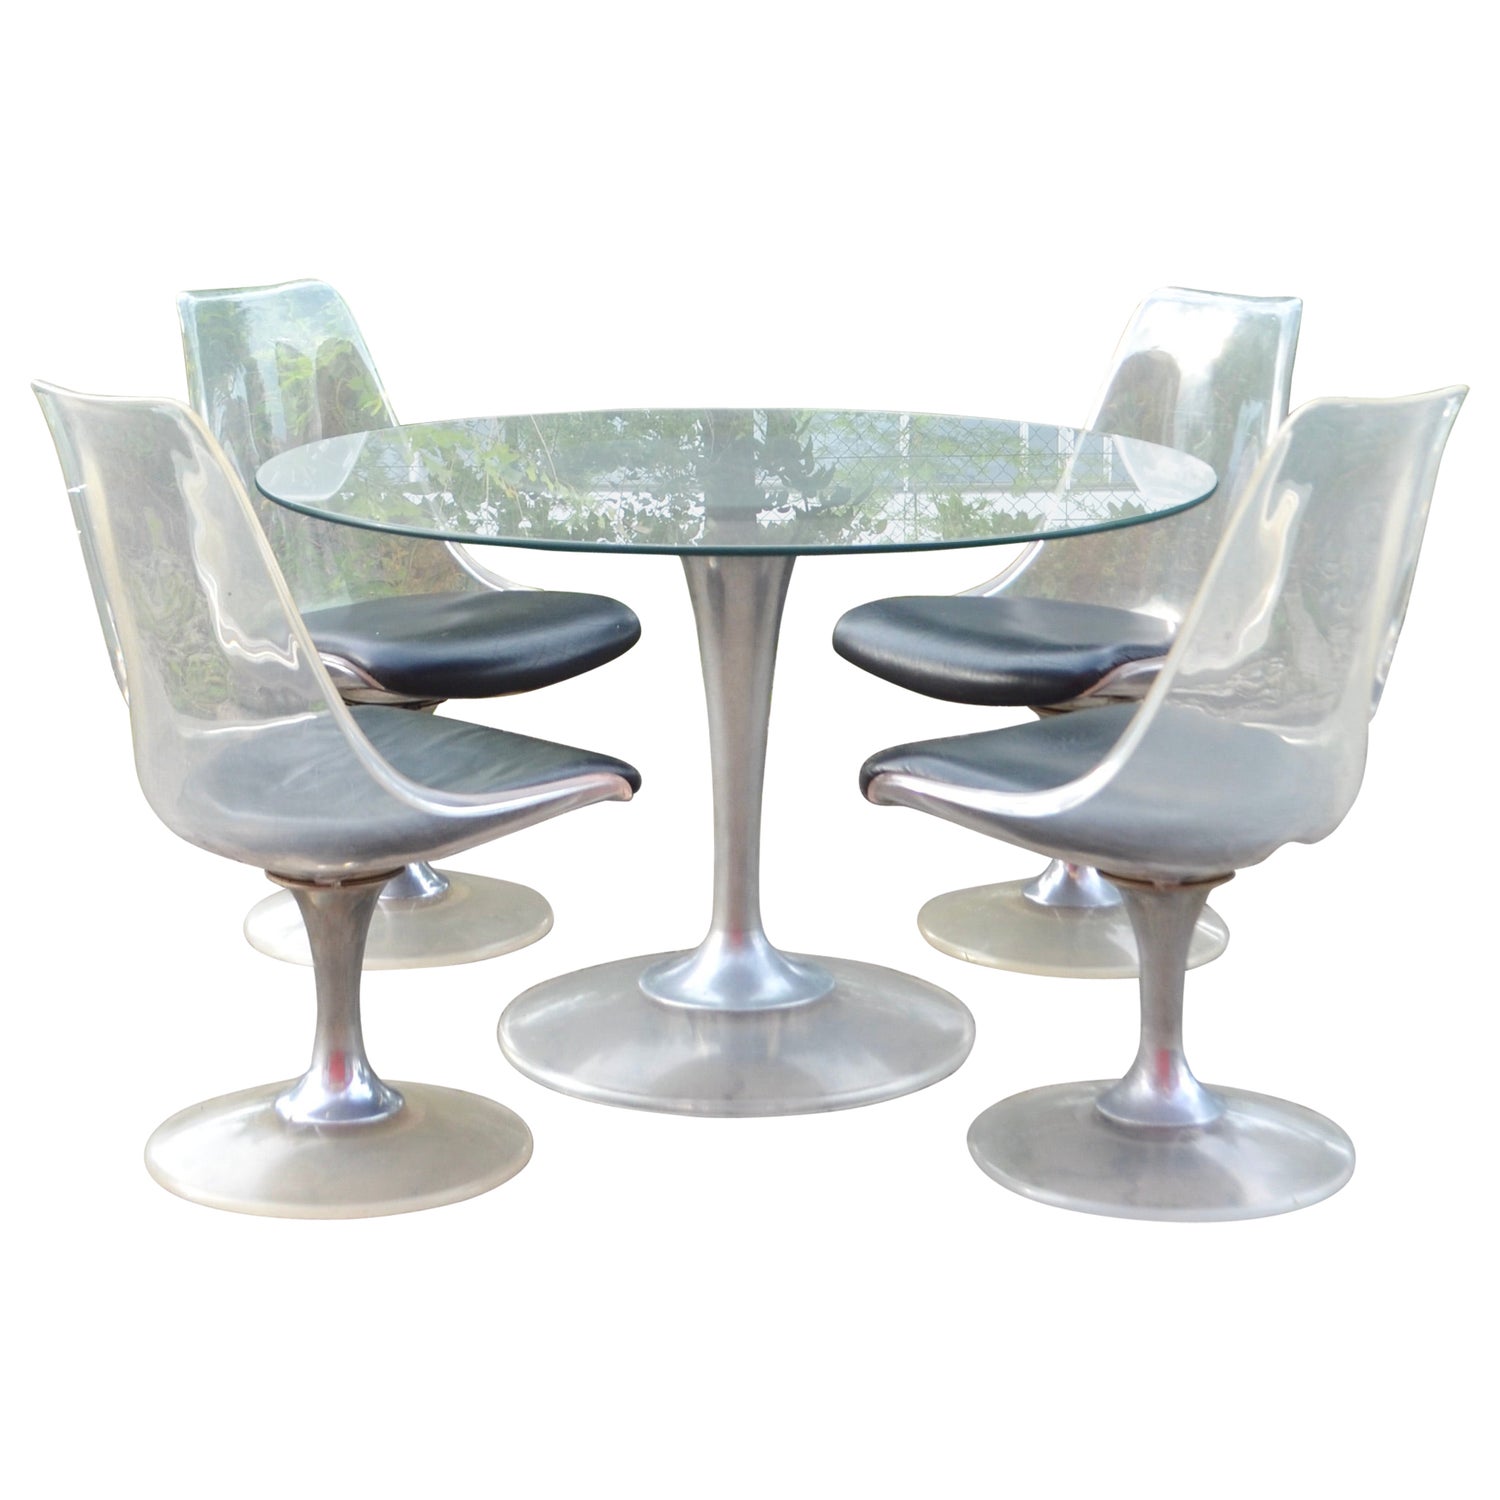 Chromcraft Smoked Lucite Dining Set of Four Tulip Chairs and Round Table  For Sale at 1stDibs  chromcraft tulip dining set, lucite dining table and  chairs, 1970s chromcraft table and chairs